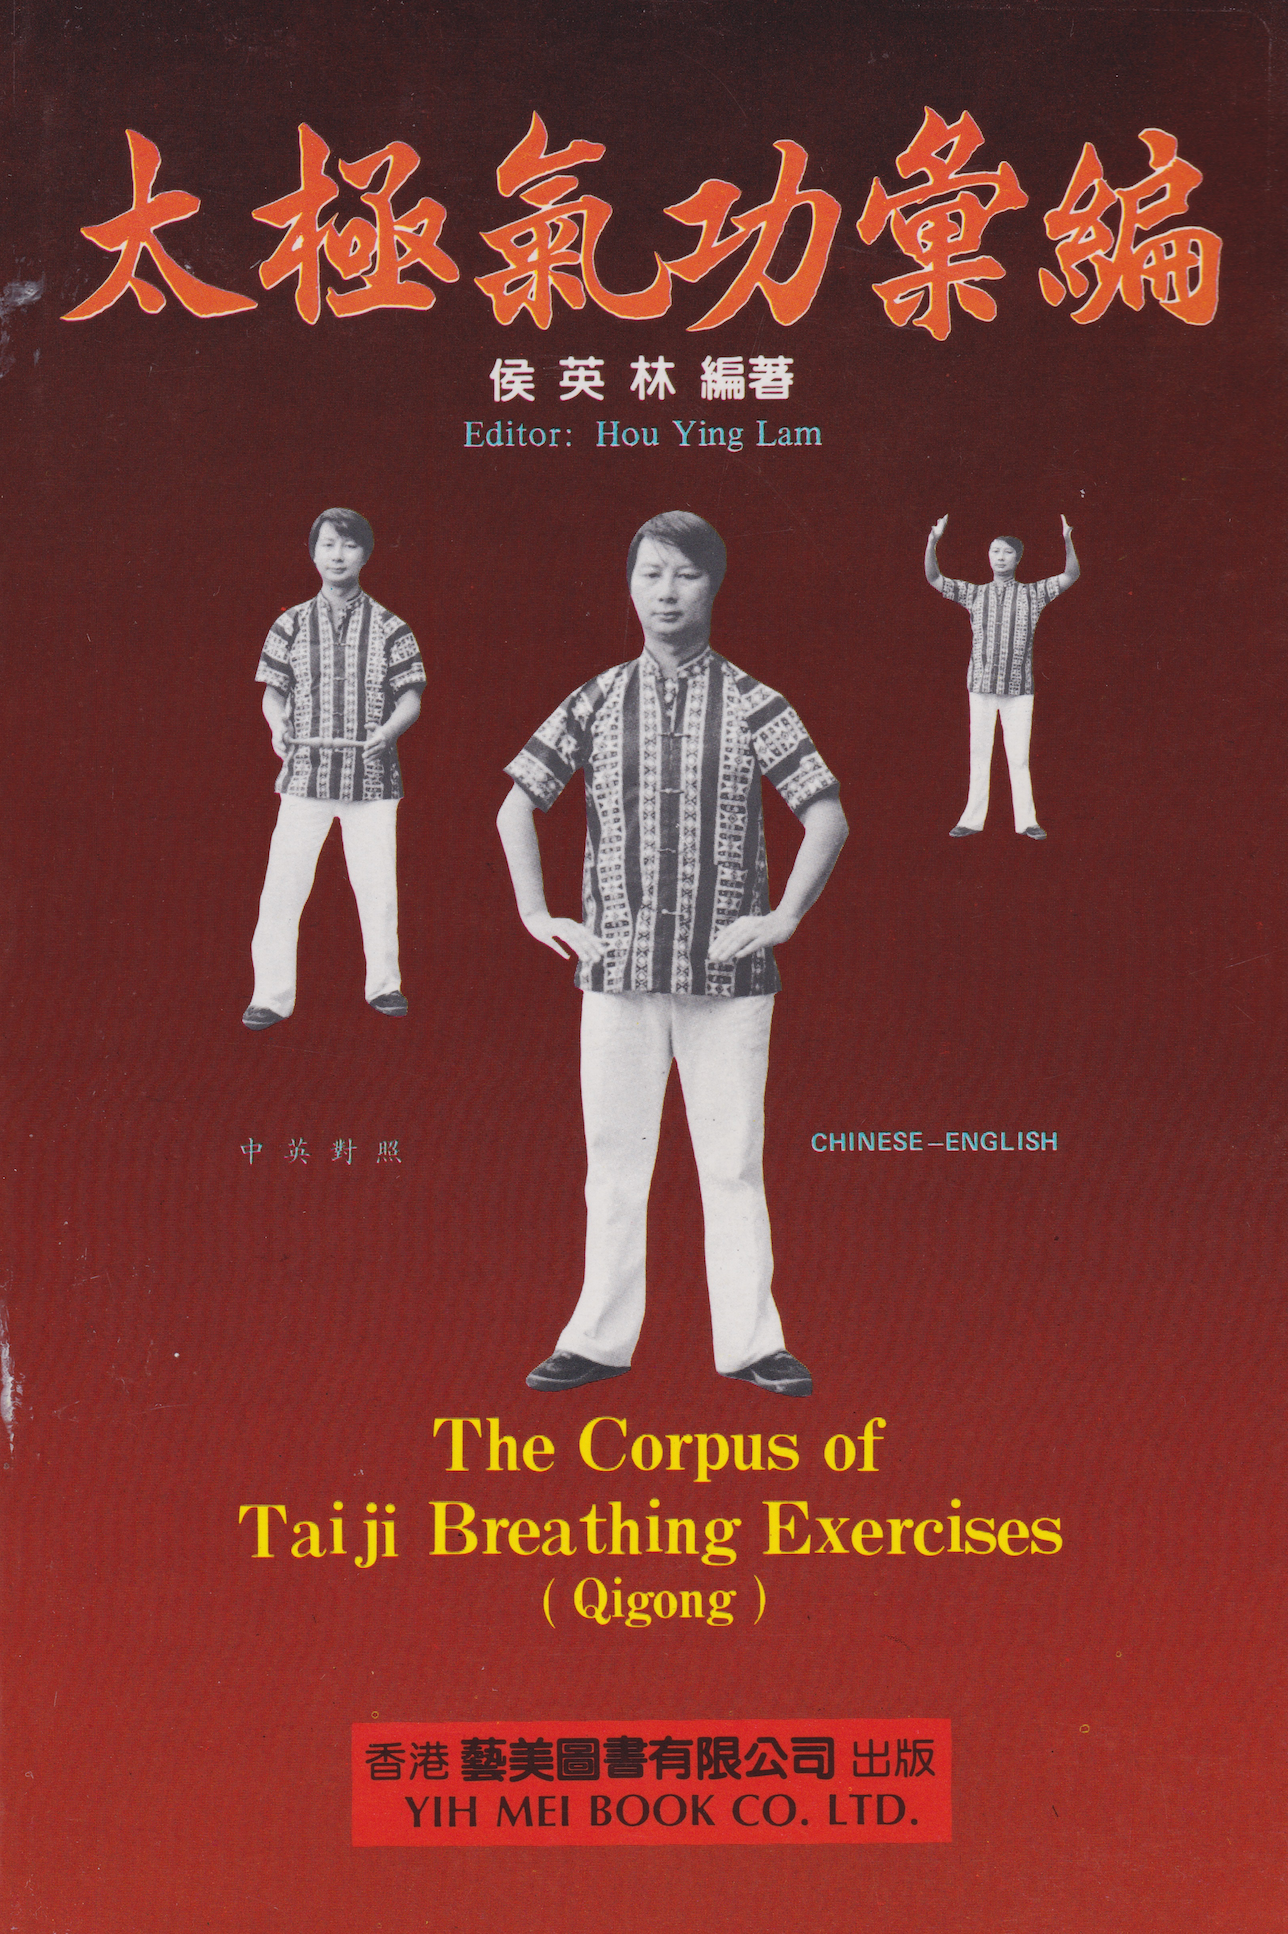 The Corpus of Taiji Breathing Exercises (Qigong) Book by Hou Ying Lam